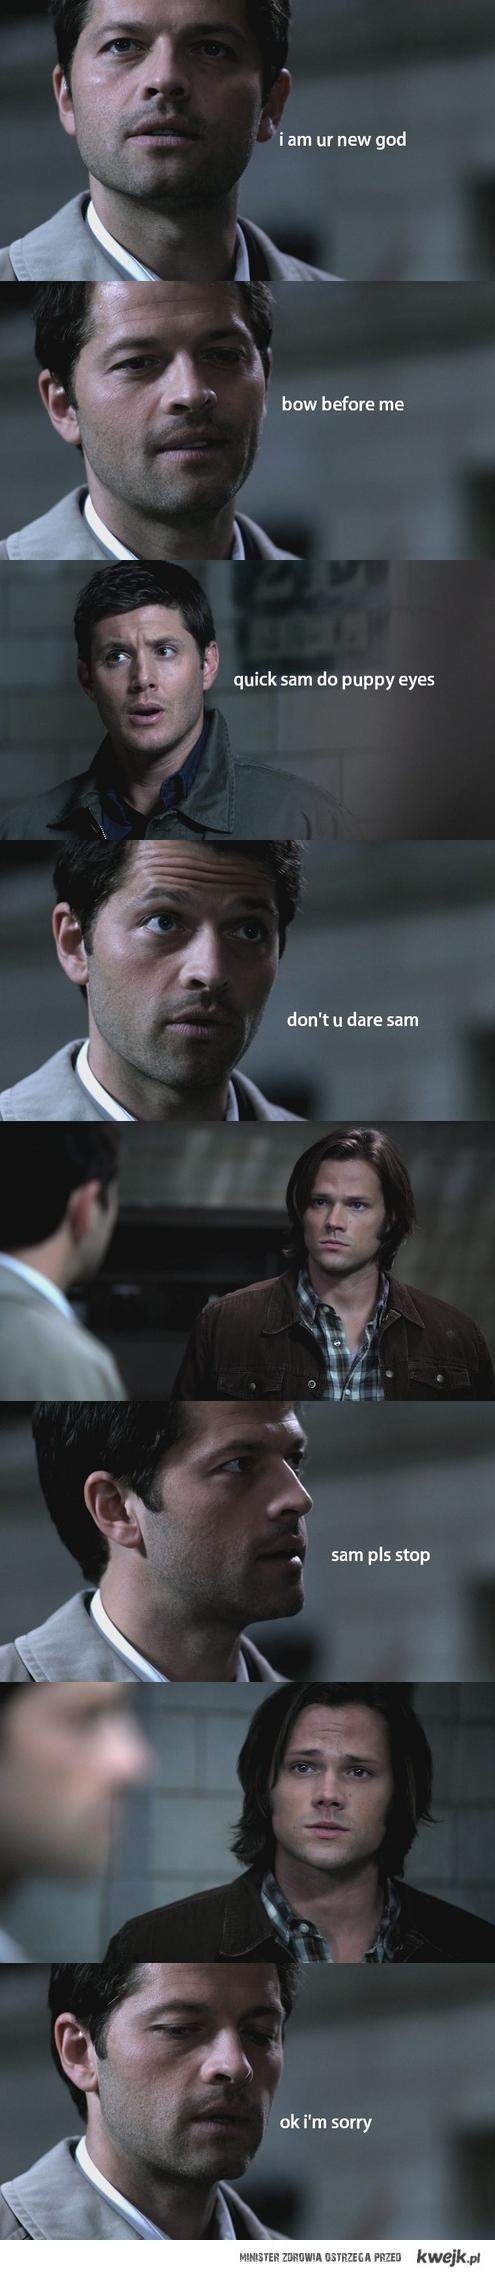 Sam's puppy eyes, they can solve anything.